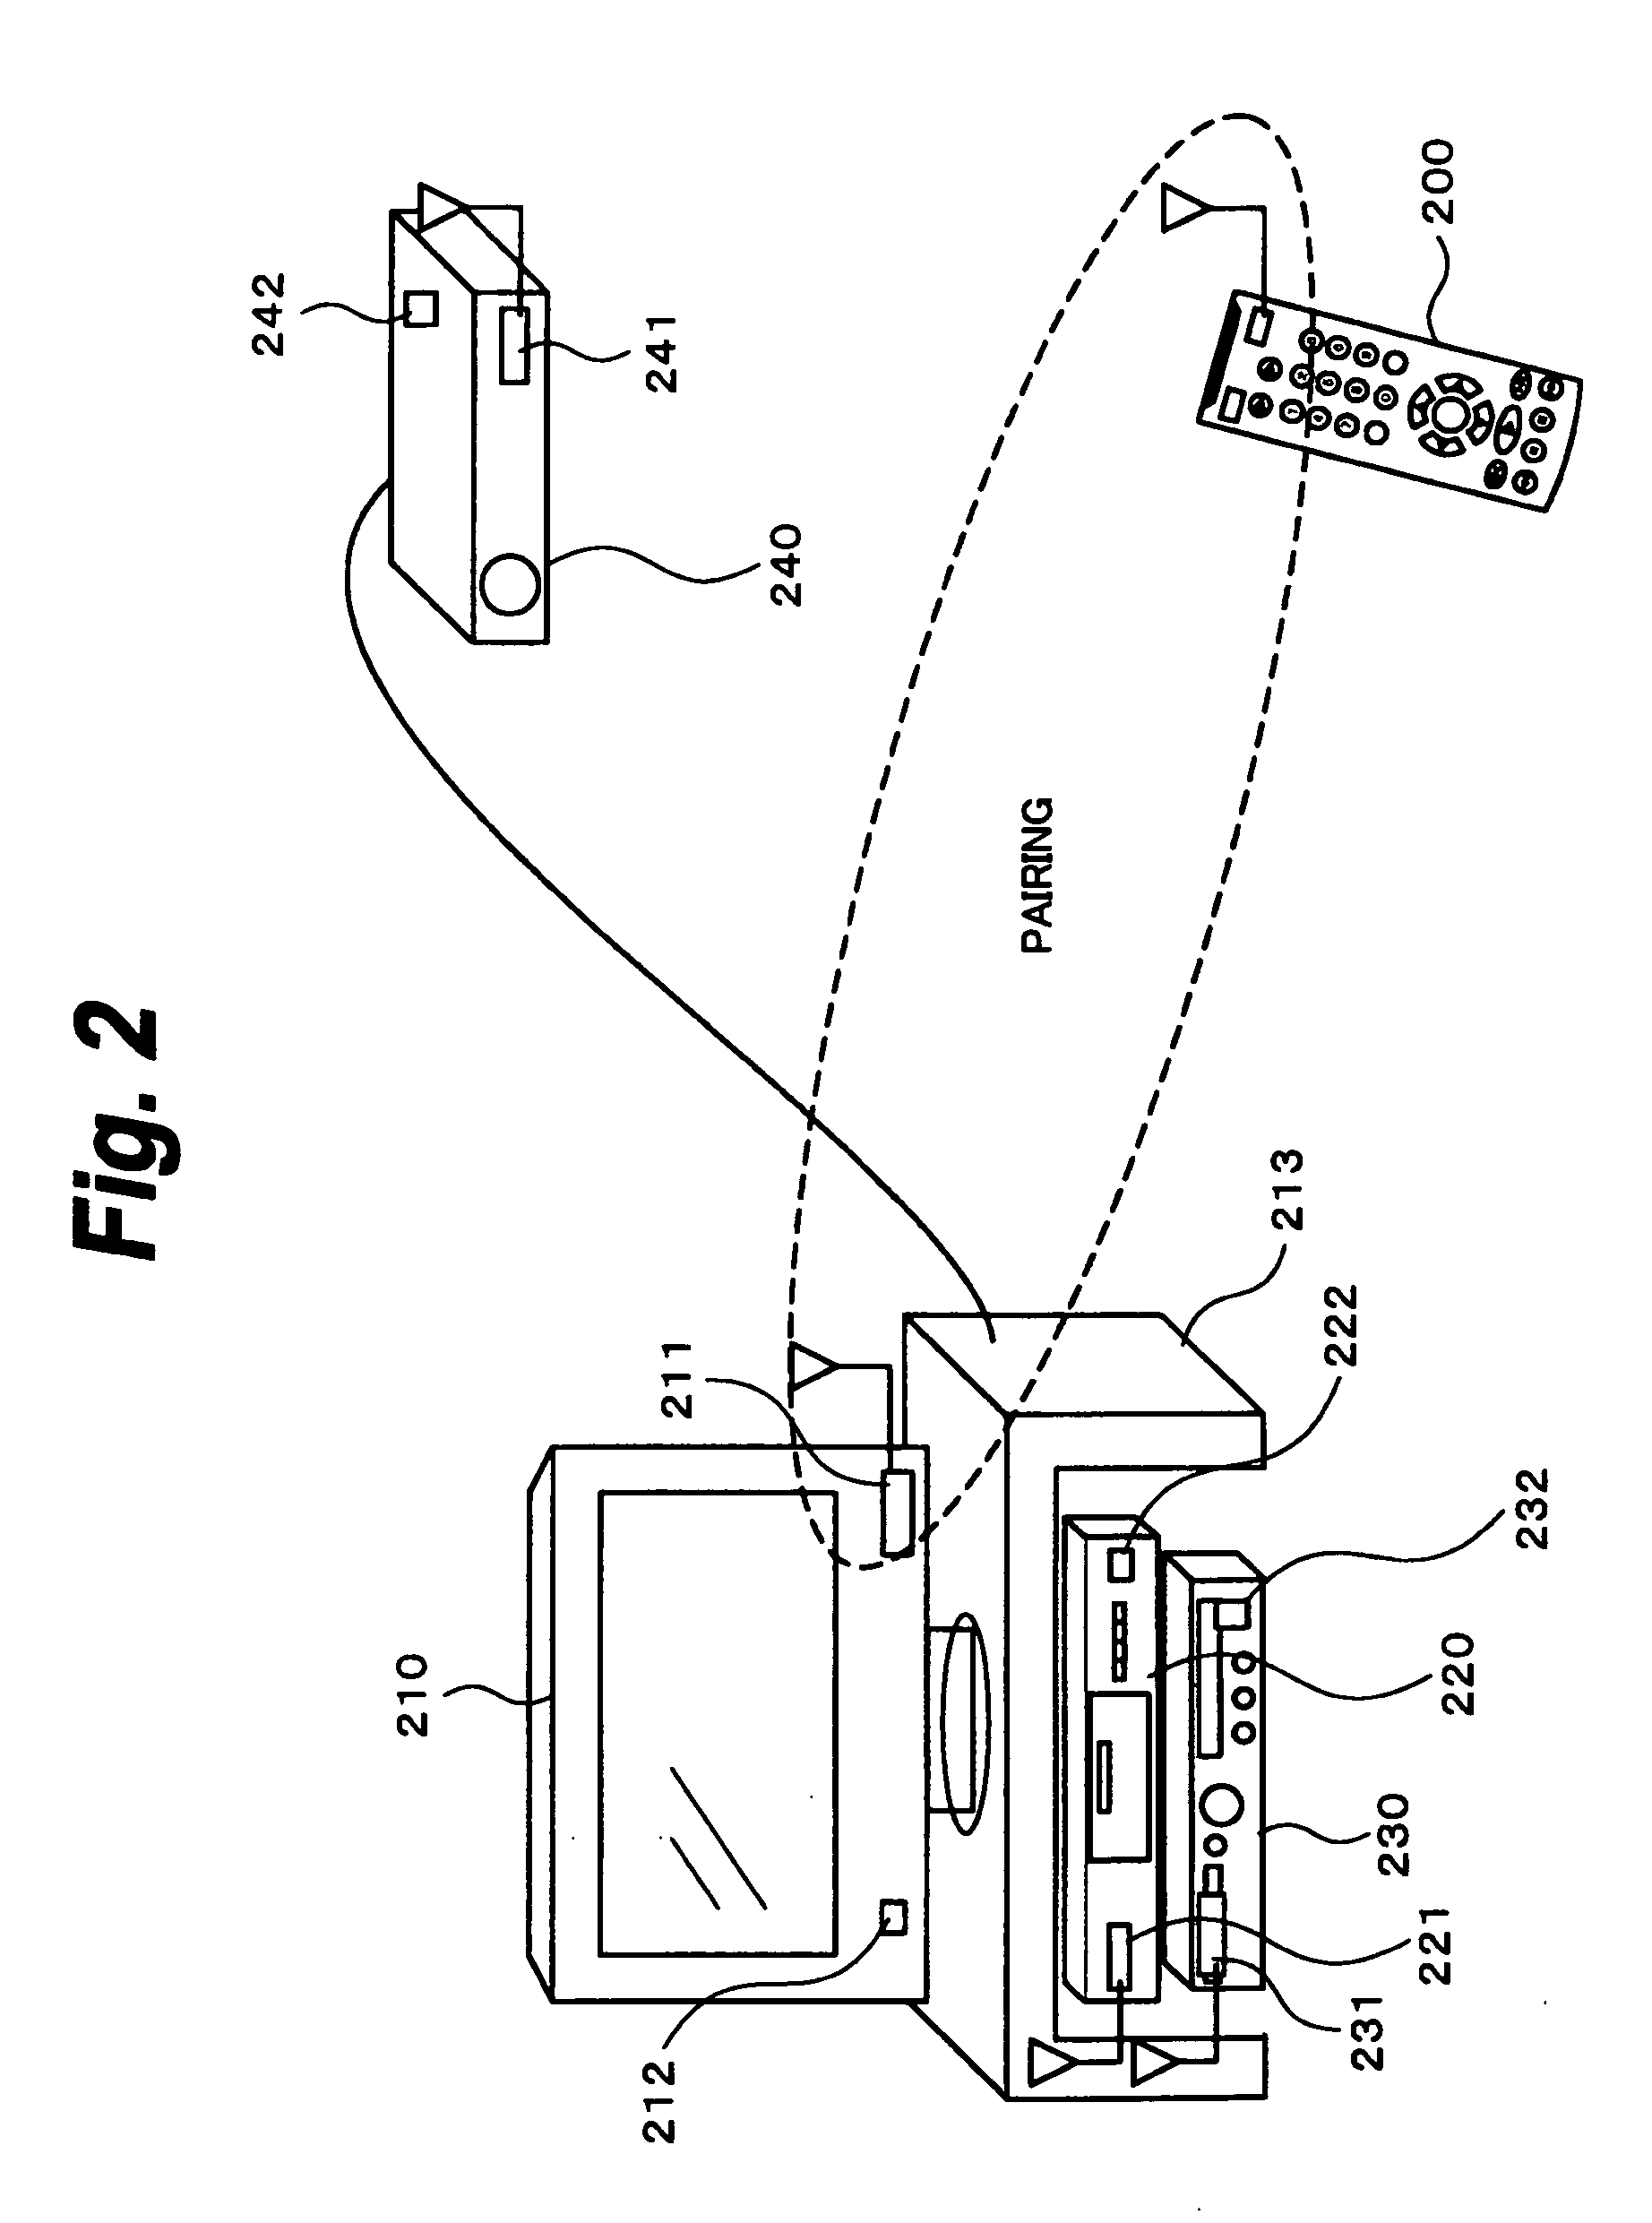 Remote control system, receiving apparatus, and electronic device